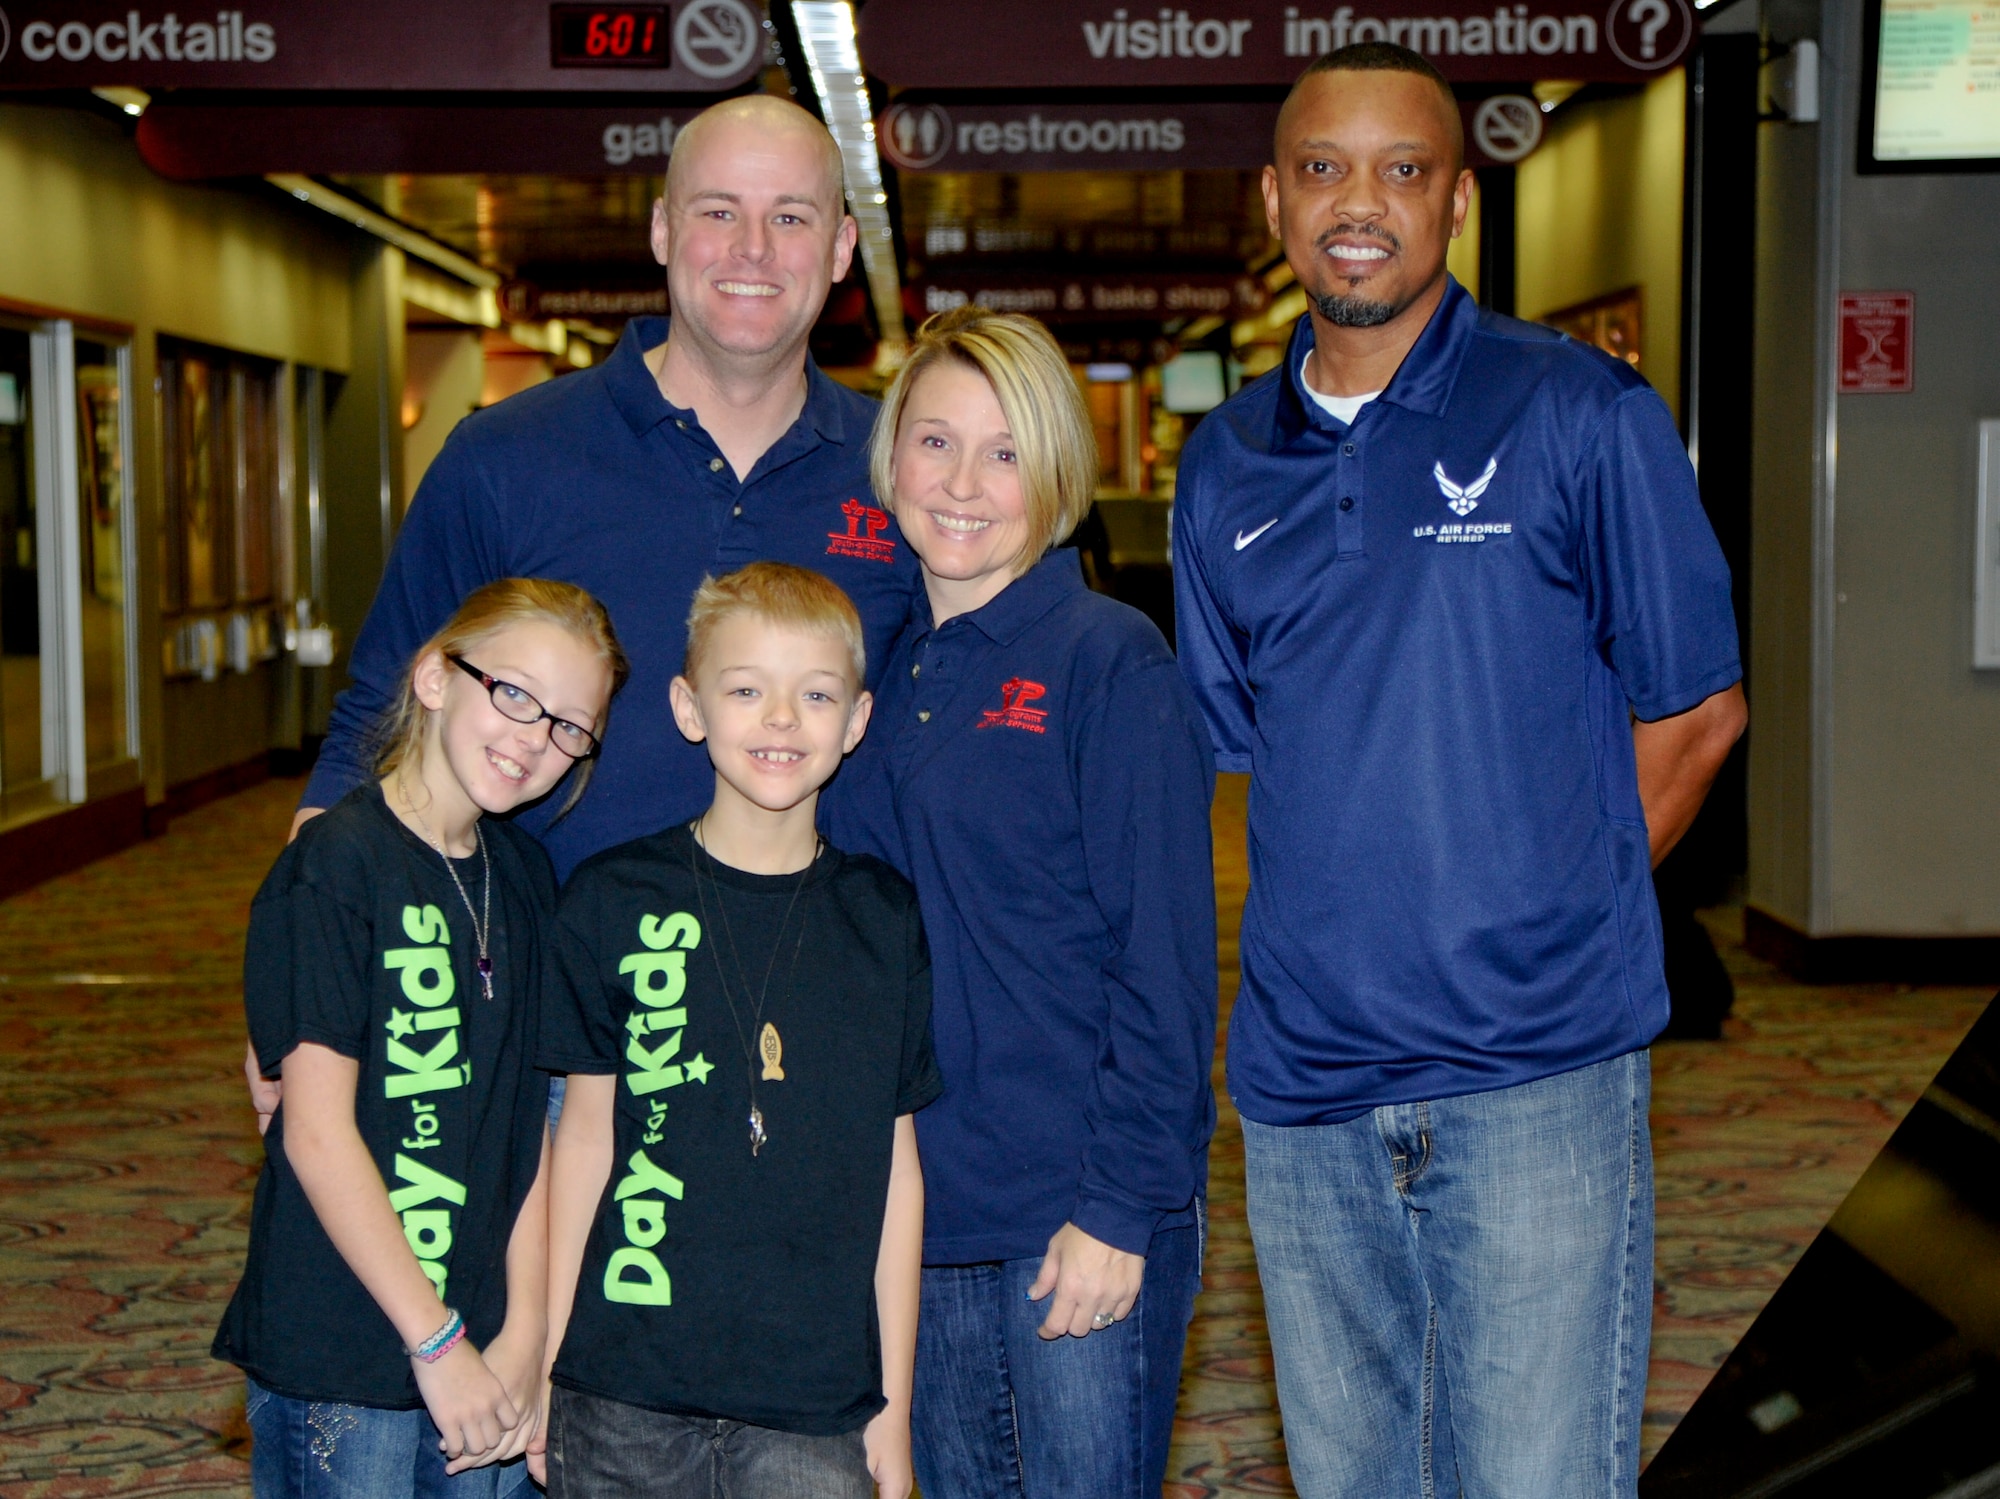 1st Lt. Scott Blair, 22nd Medical Group resource flight commander, his wife Heather, children Paige Alise and Braxton, and James Jolliff (left), 22nd Force Support Squadron Youth Center director, pose for a picture Jan. 10, 2014 at the Wichita Mid-Continent Airport, Kan. The Blairs are traveling to Los Angeles to compete with four other families in the Triple Play Fit Family Challenge, a health-promoting competition they were introduced to by Jolliff. (U.S. Air Force photo/Airman 1st Class John Linzmeier)